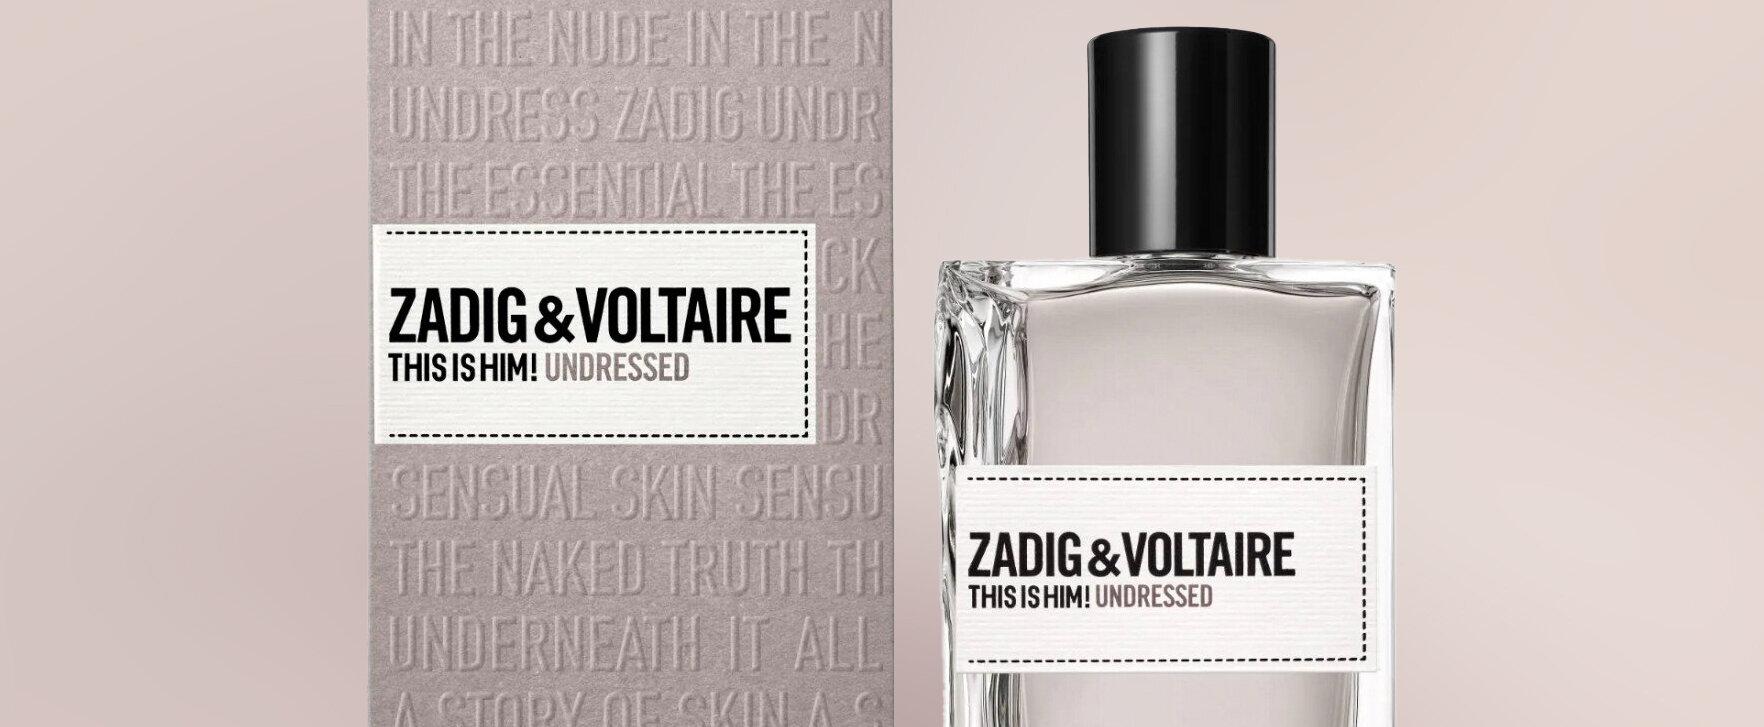 “This Is Him! Undressed” - The New Masculine Fragrance by Zadig & Voltaire